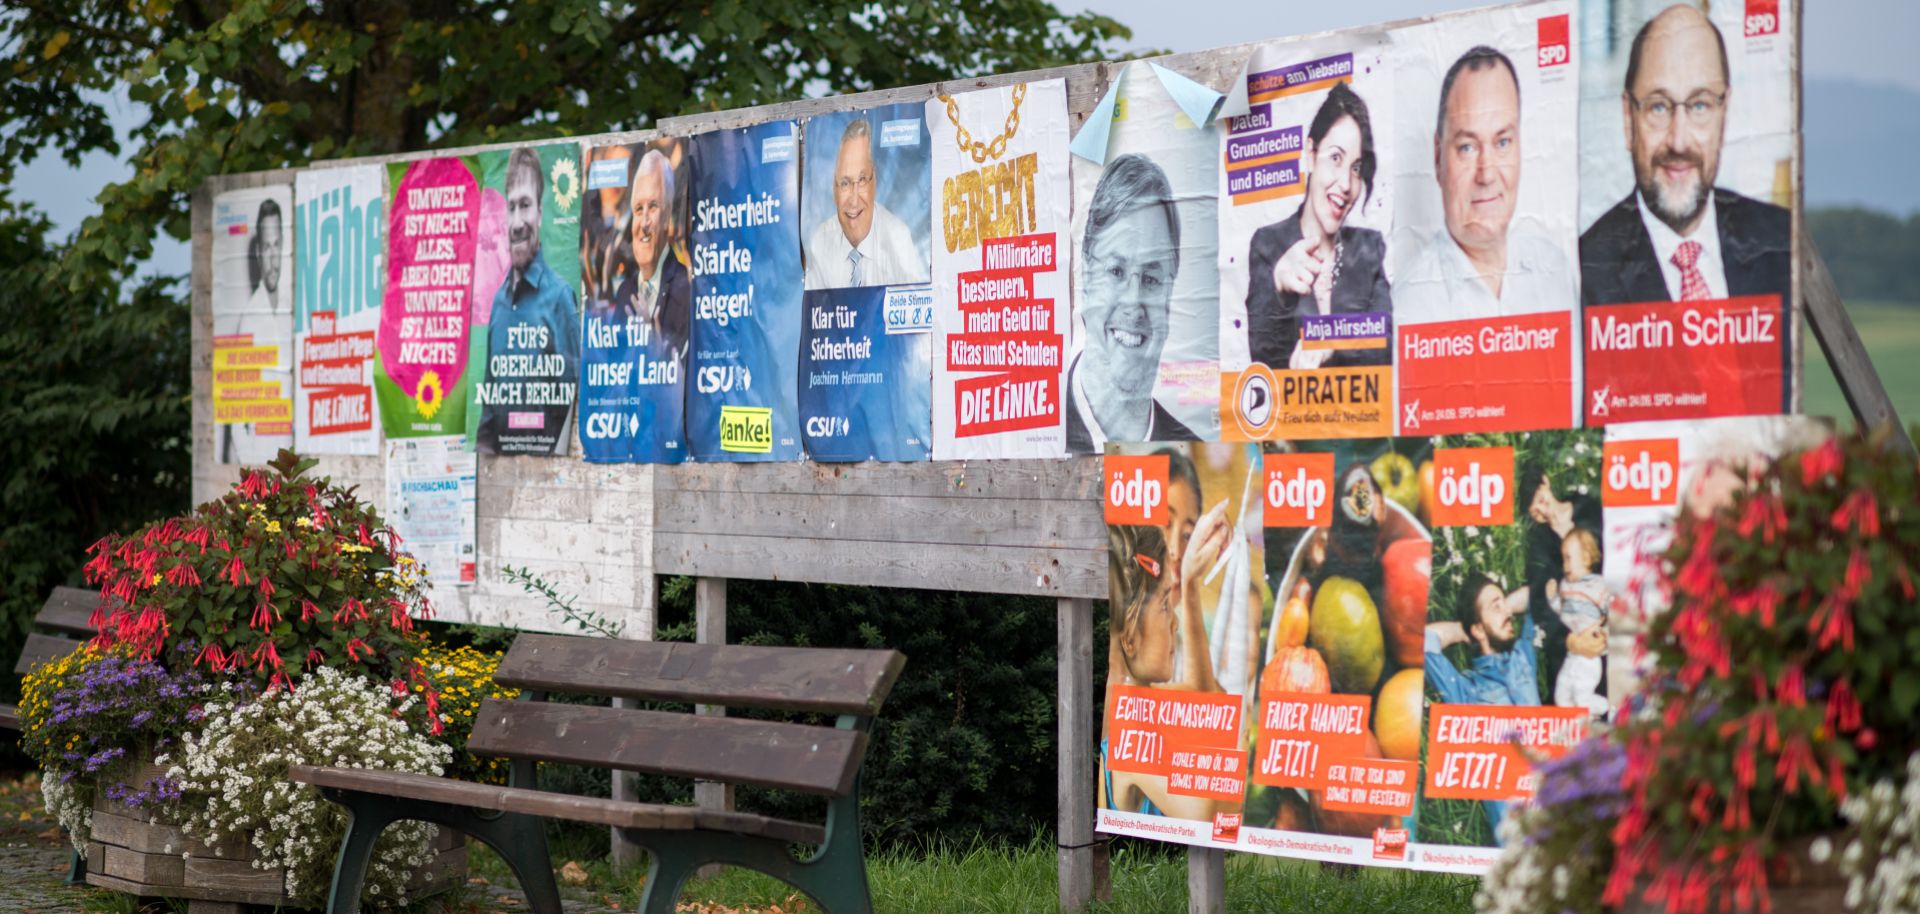 Campaign placards for various parties are seen during German federal elections on Sept. 24, 2017 near Bayrischzell, Germany. Chancellor Angela Merkel's conservative Christian Democratic Union (CDU) won the largest portion of the vote, while another five parties received enough support to gain seats in parliament. With so many voices earning a say, the negotiations could take weeks if not months.